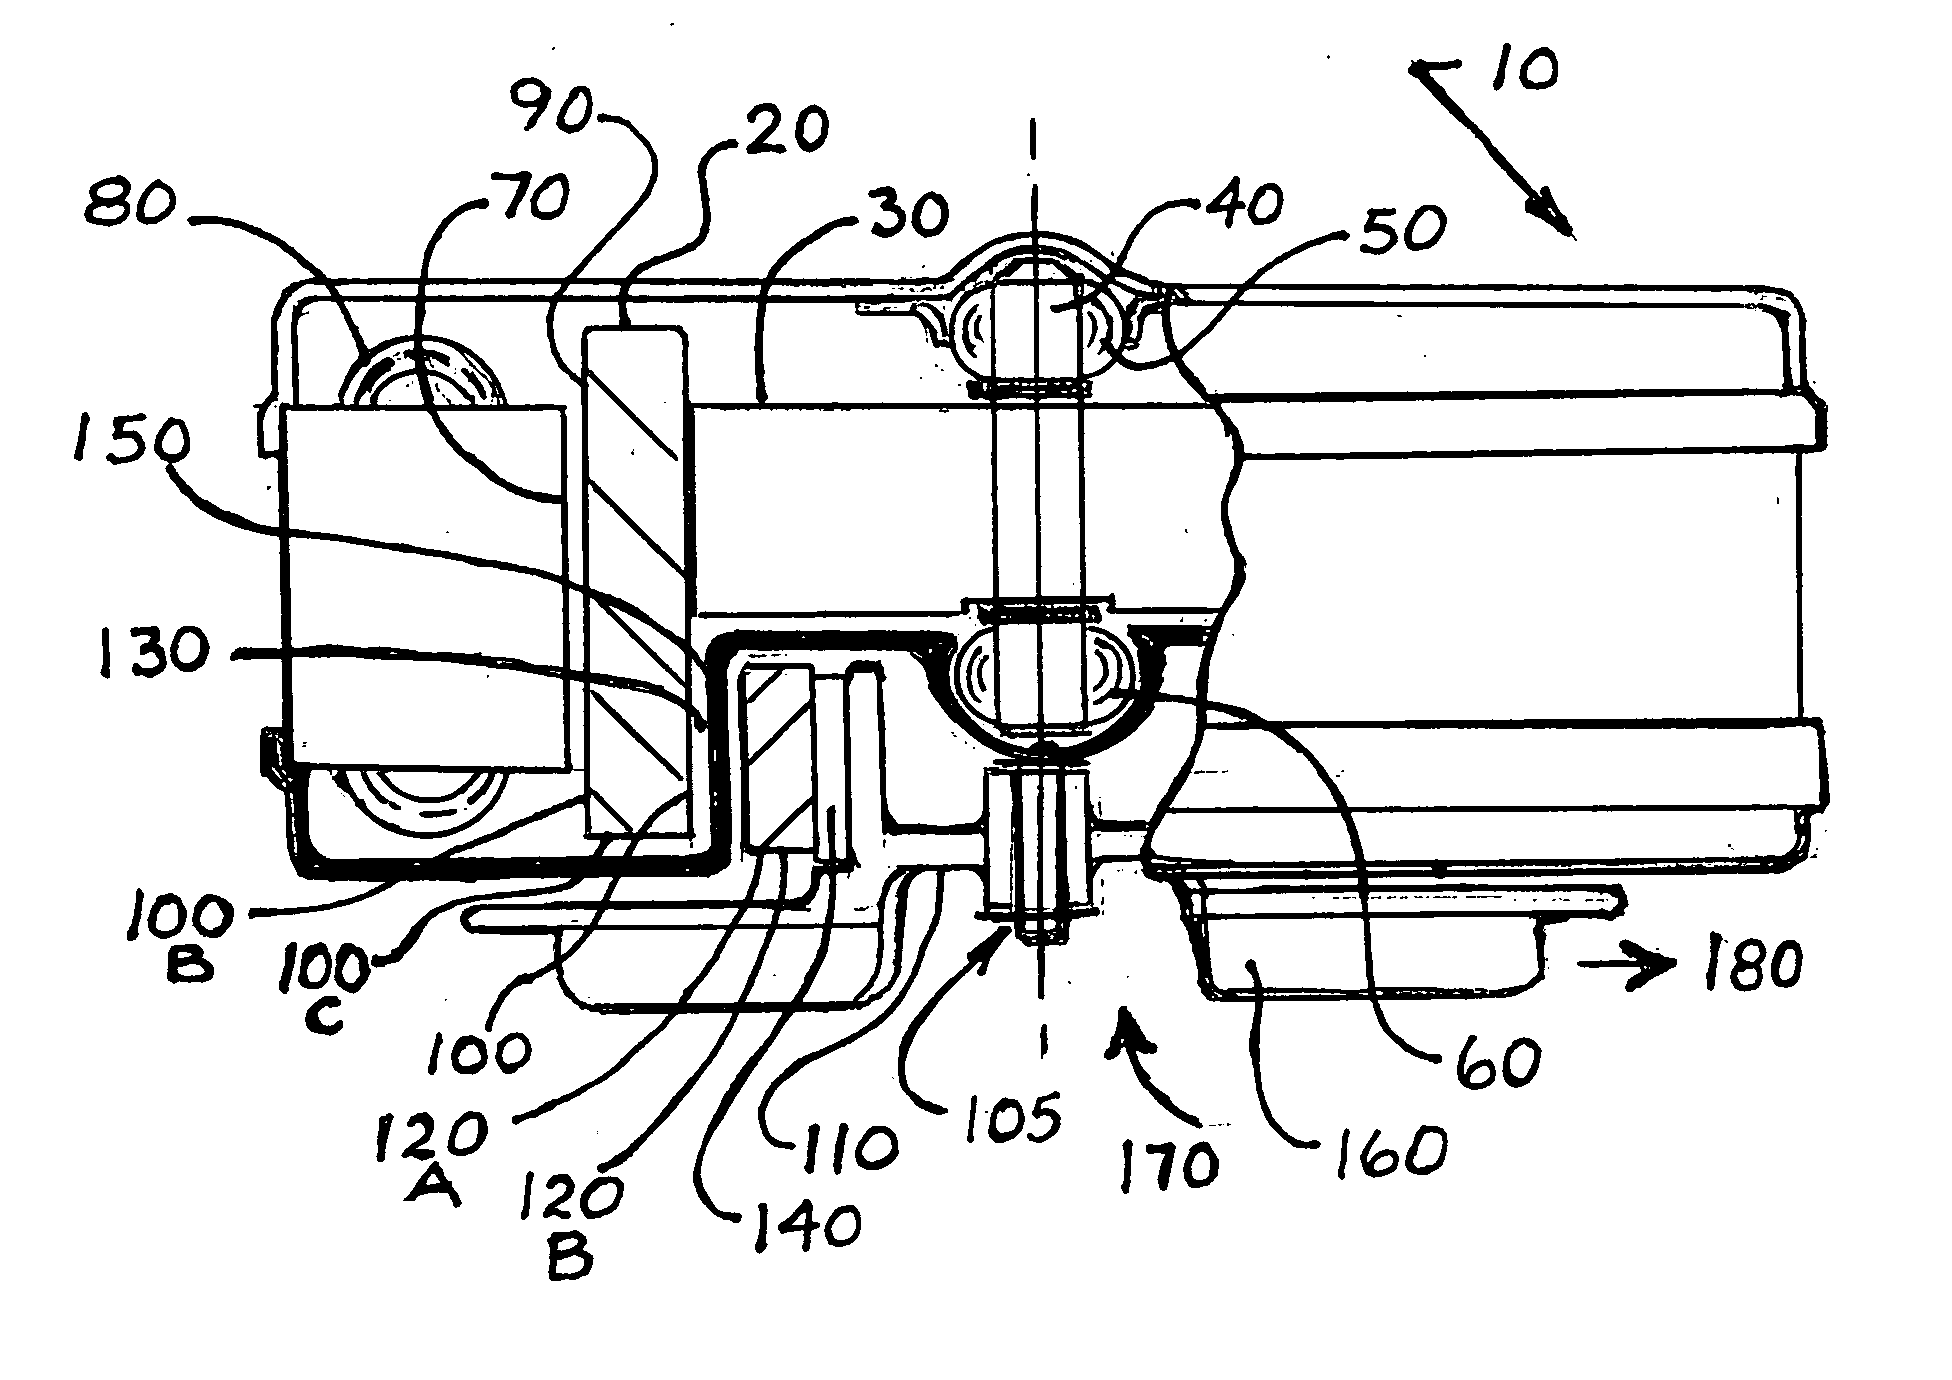 Magnetic coupling using magnets on a motor rotor